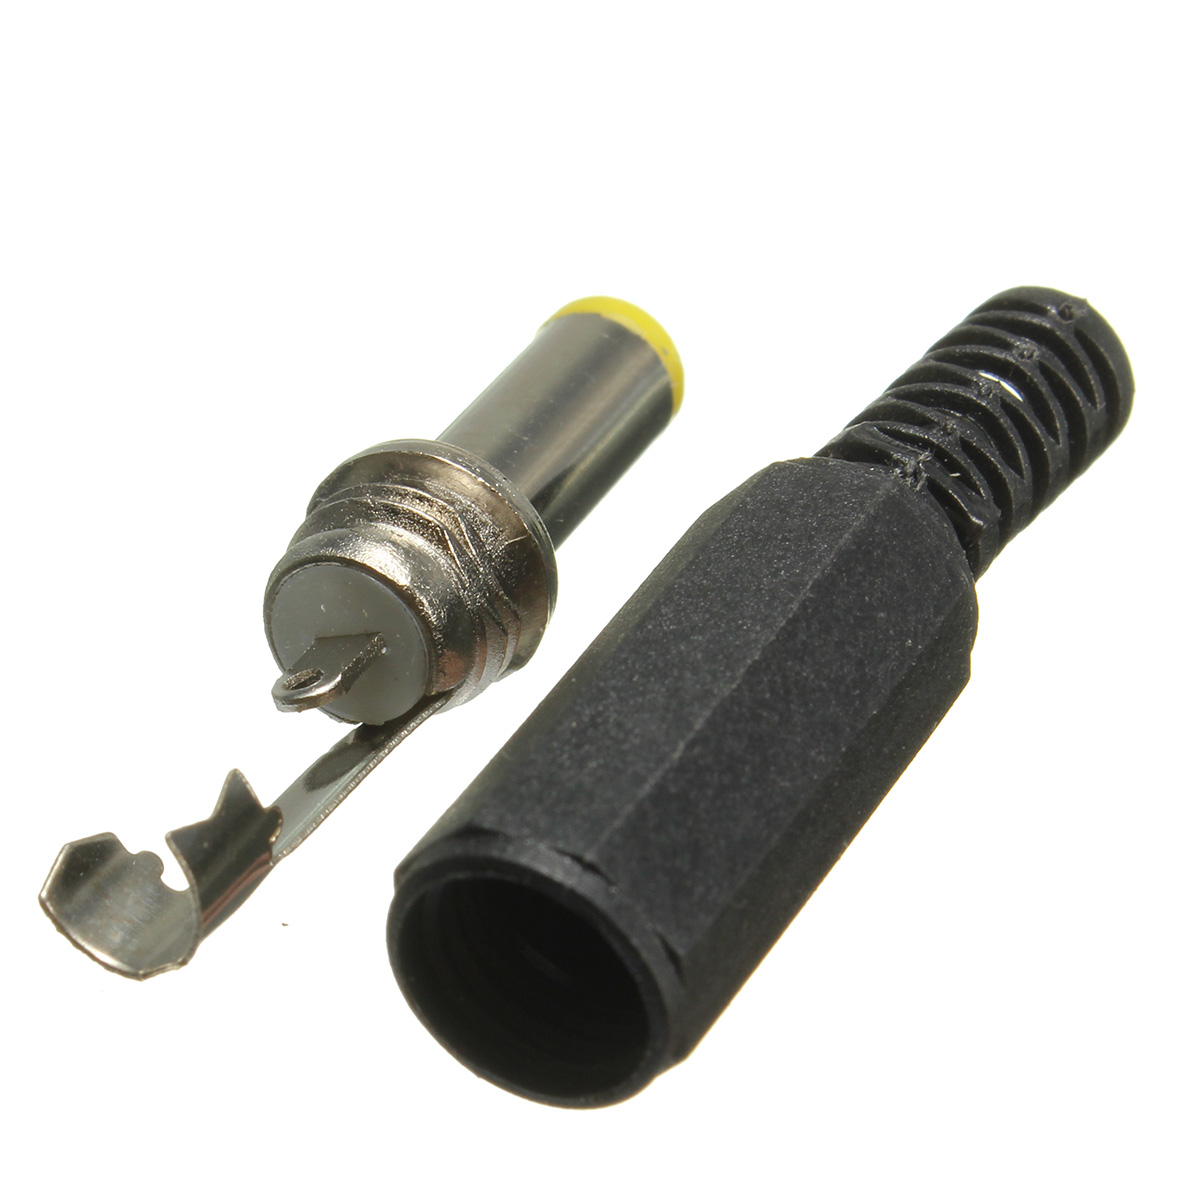 2.1Mm X 5.5Mm DC Connector Male Plug and Female Panel Mount Socket Jack